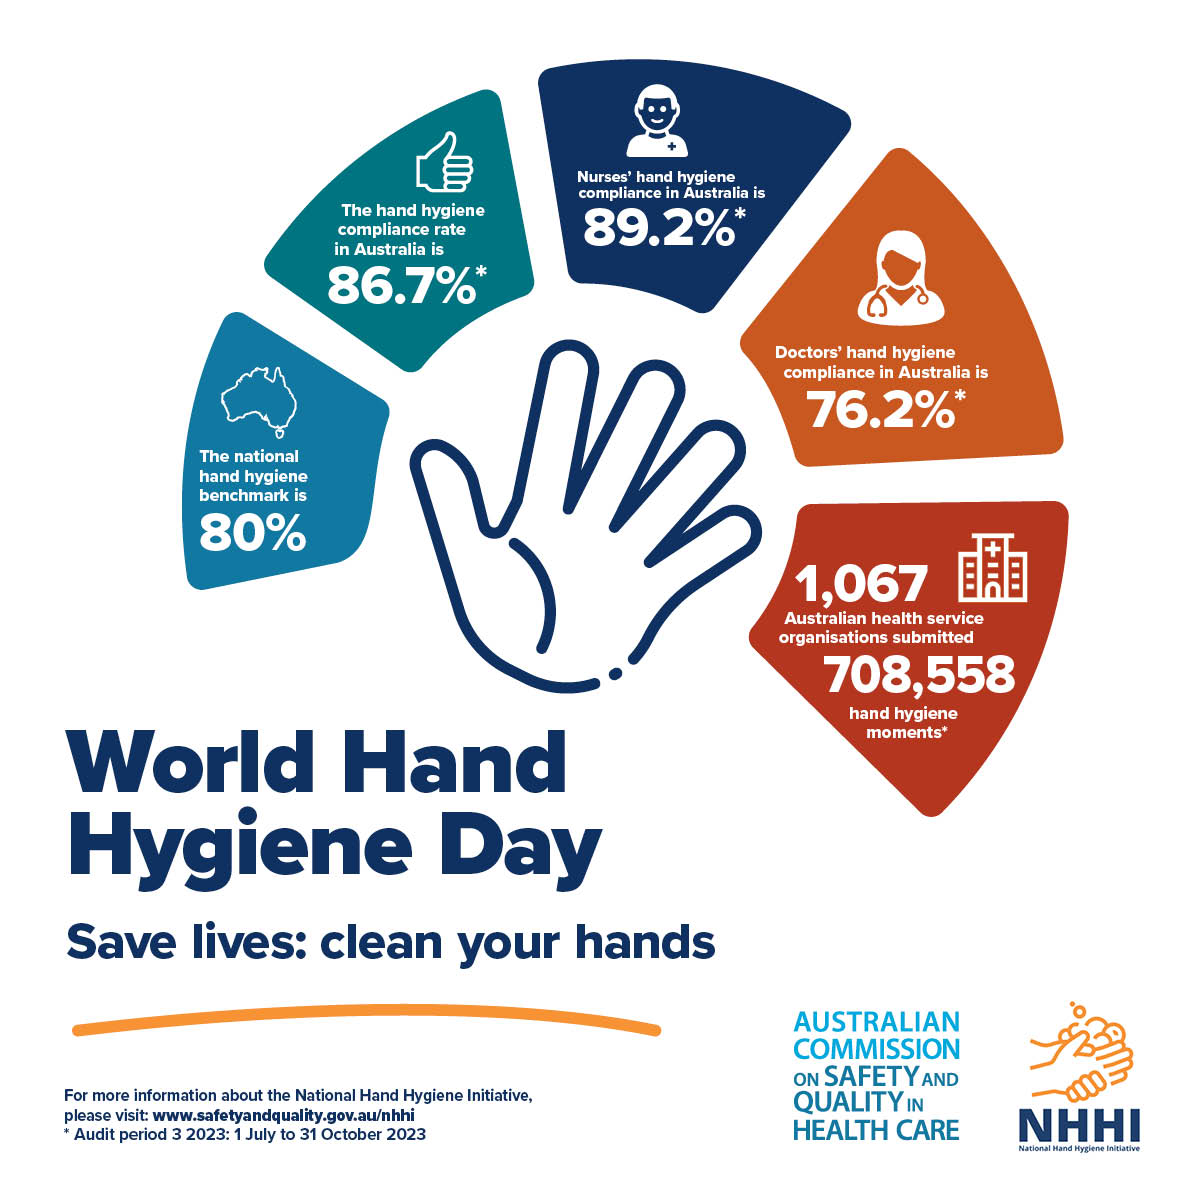 Today is World Hand Hygiene Day, reminding all health practitioners that #handhygiene protects you and your patients from infection. Every moment of hand hygiene matters.

Learn more and access the latest resources safetyandquality.gov.au/WHHD

#WHHD #NHHI #infectionprevention